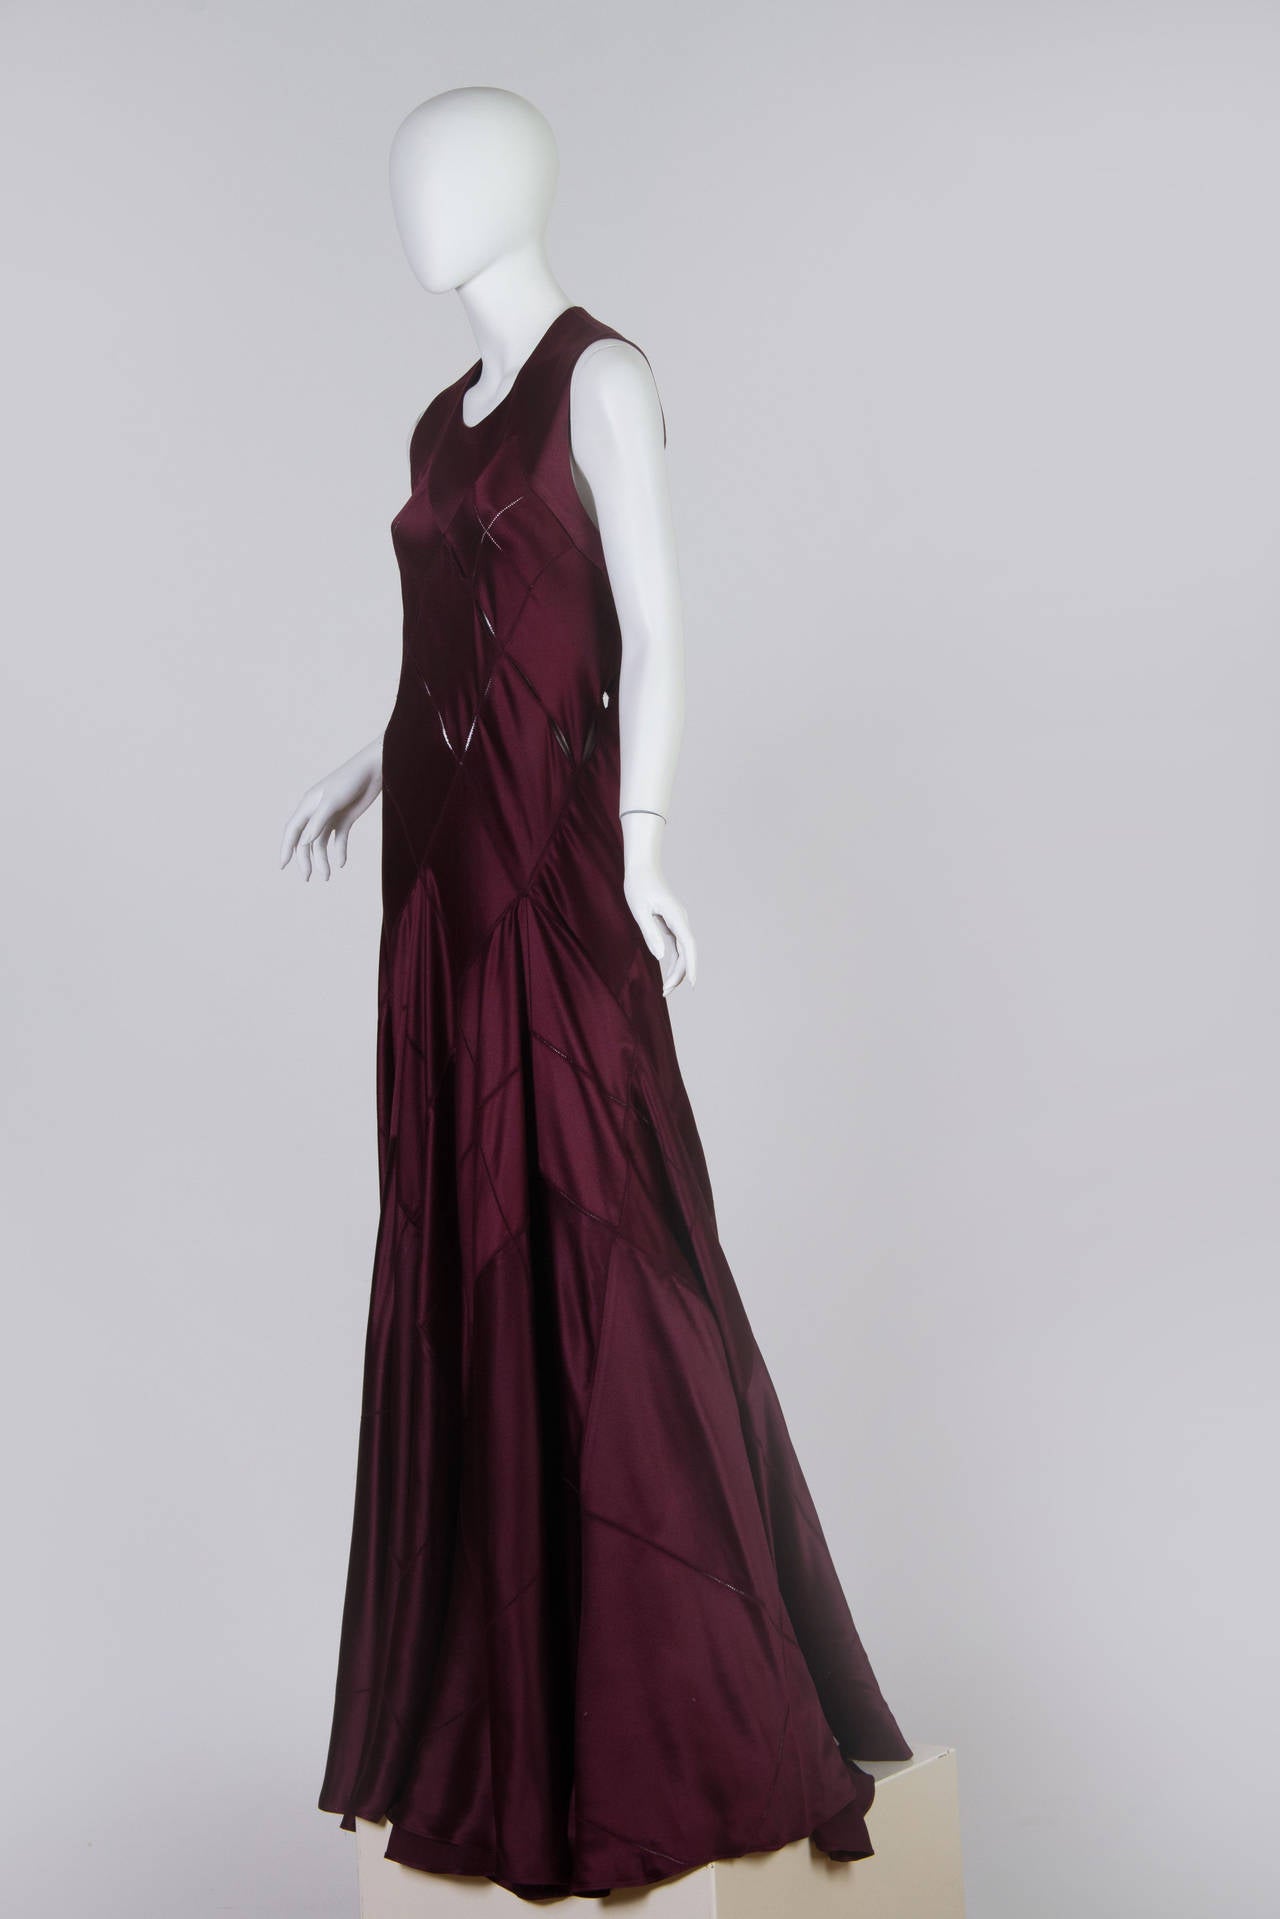 Flawless design from one of the fashion world's quietest stars. Andreas Melbostad has kept the house of Calvin Klein afloat with his ever relevant as well as timeless and flattering designs. Here this bias cut gown has been pieced together and